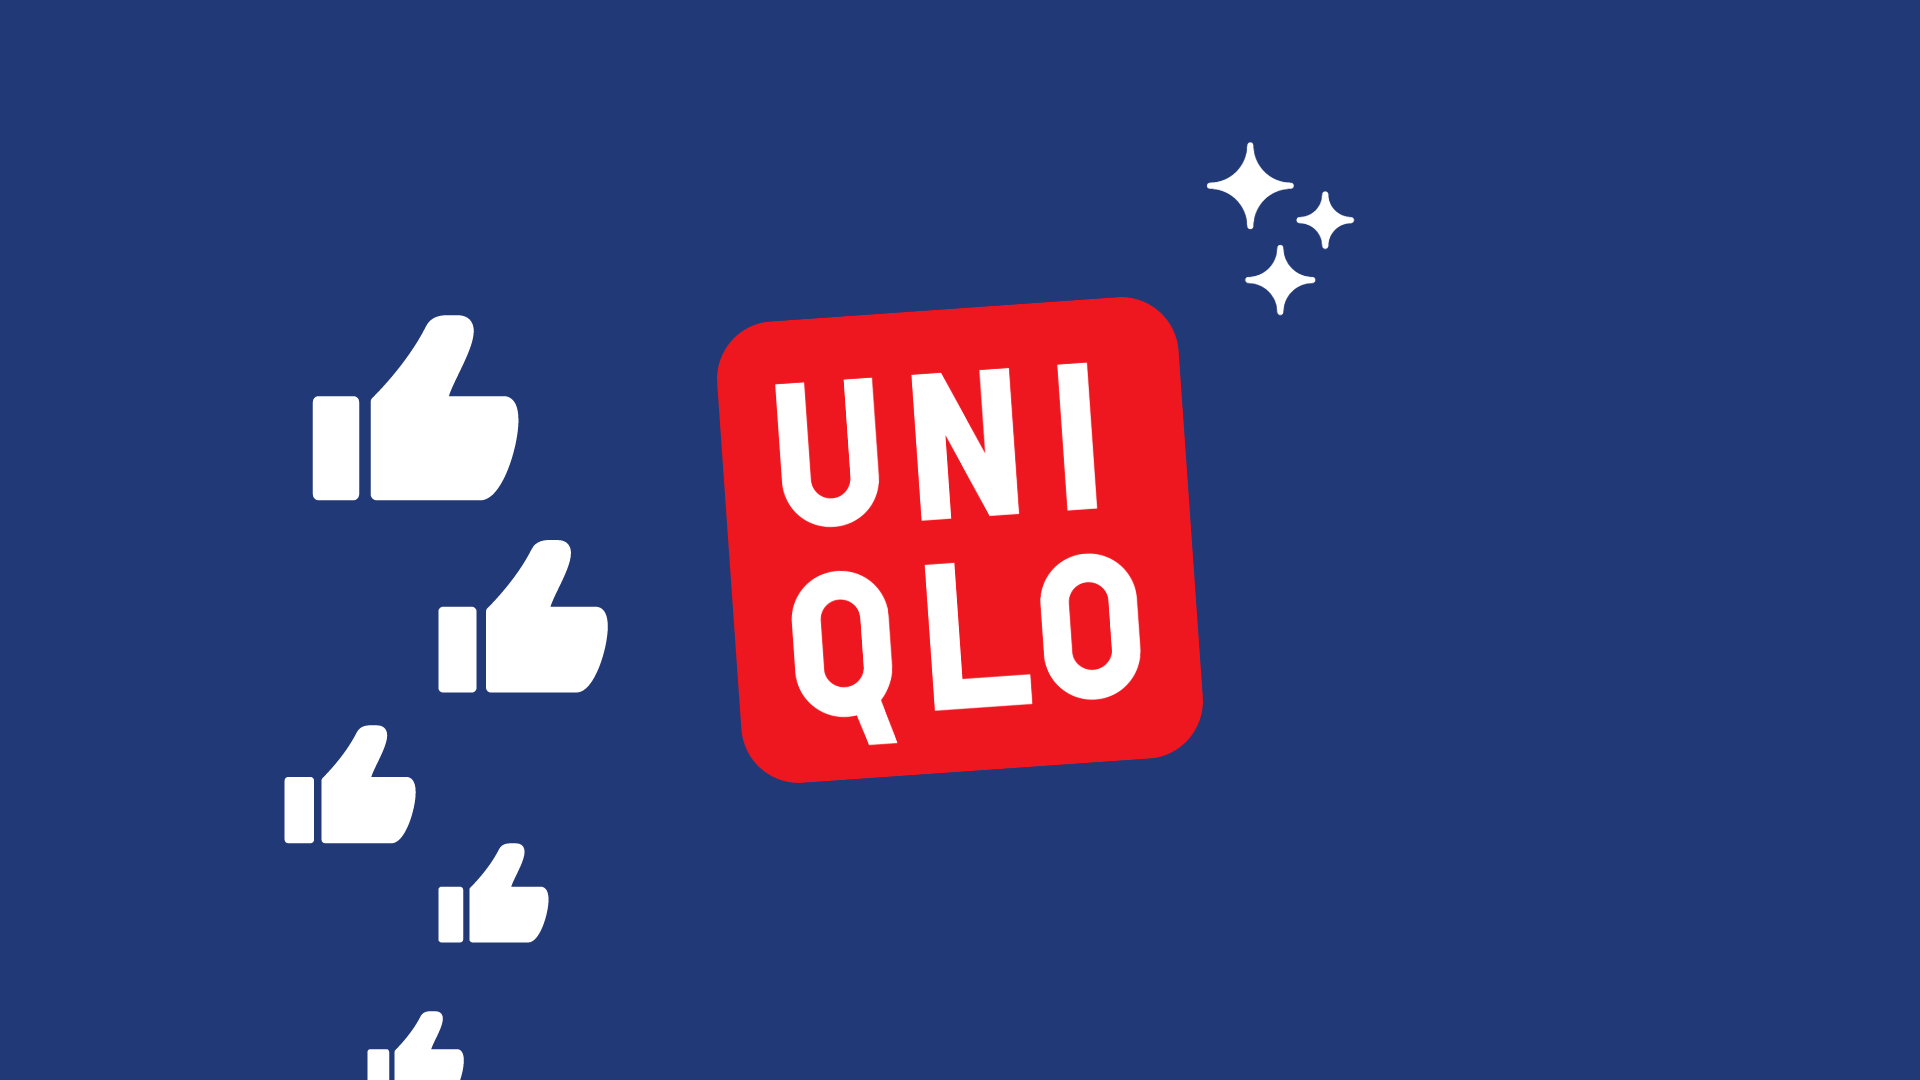 UNIQLO SINGAPORE ONLINE - THE LARGEST PRODUCT LINEUPS AVAILABLE